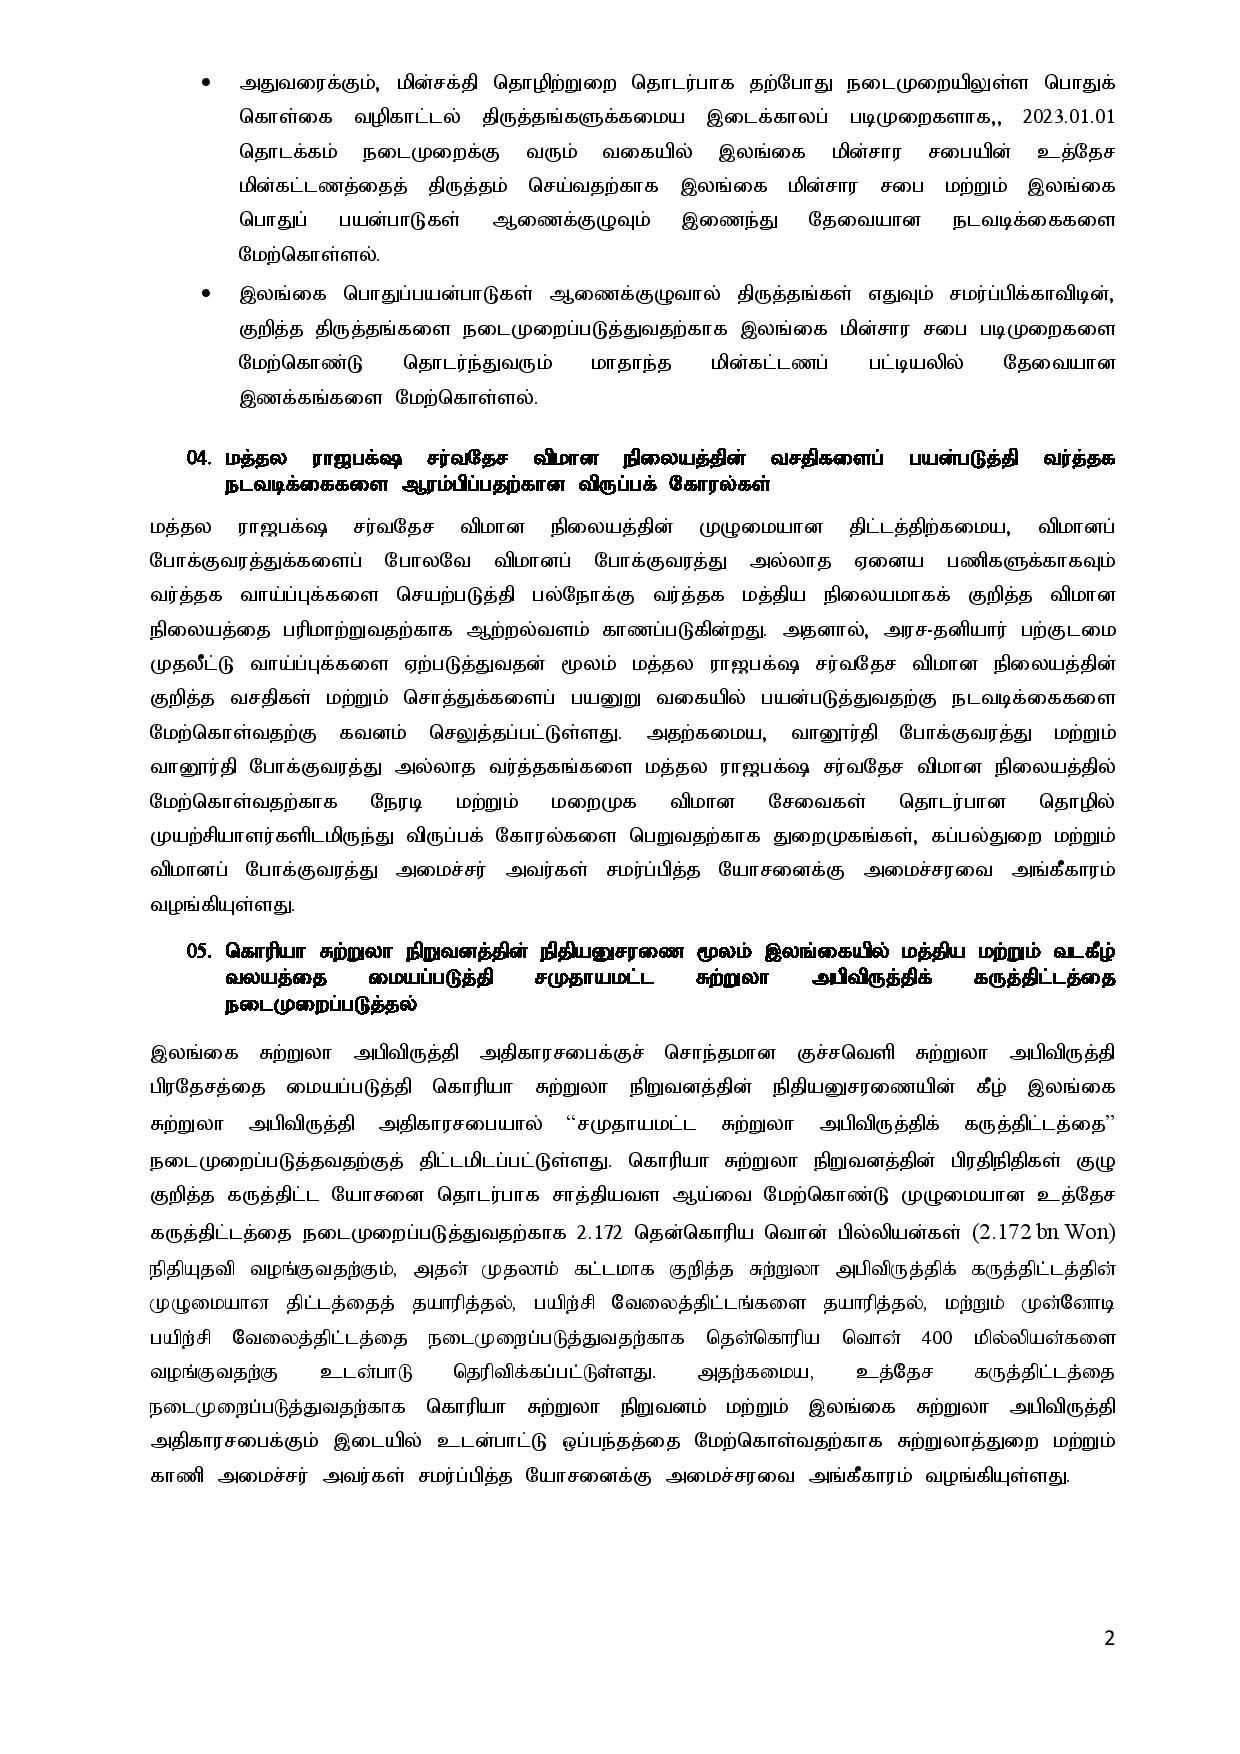 Cabinet Decisions on 09.01.2023 Tamil page 002 1